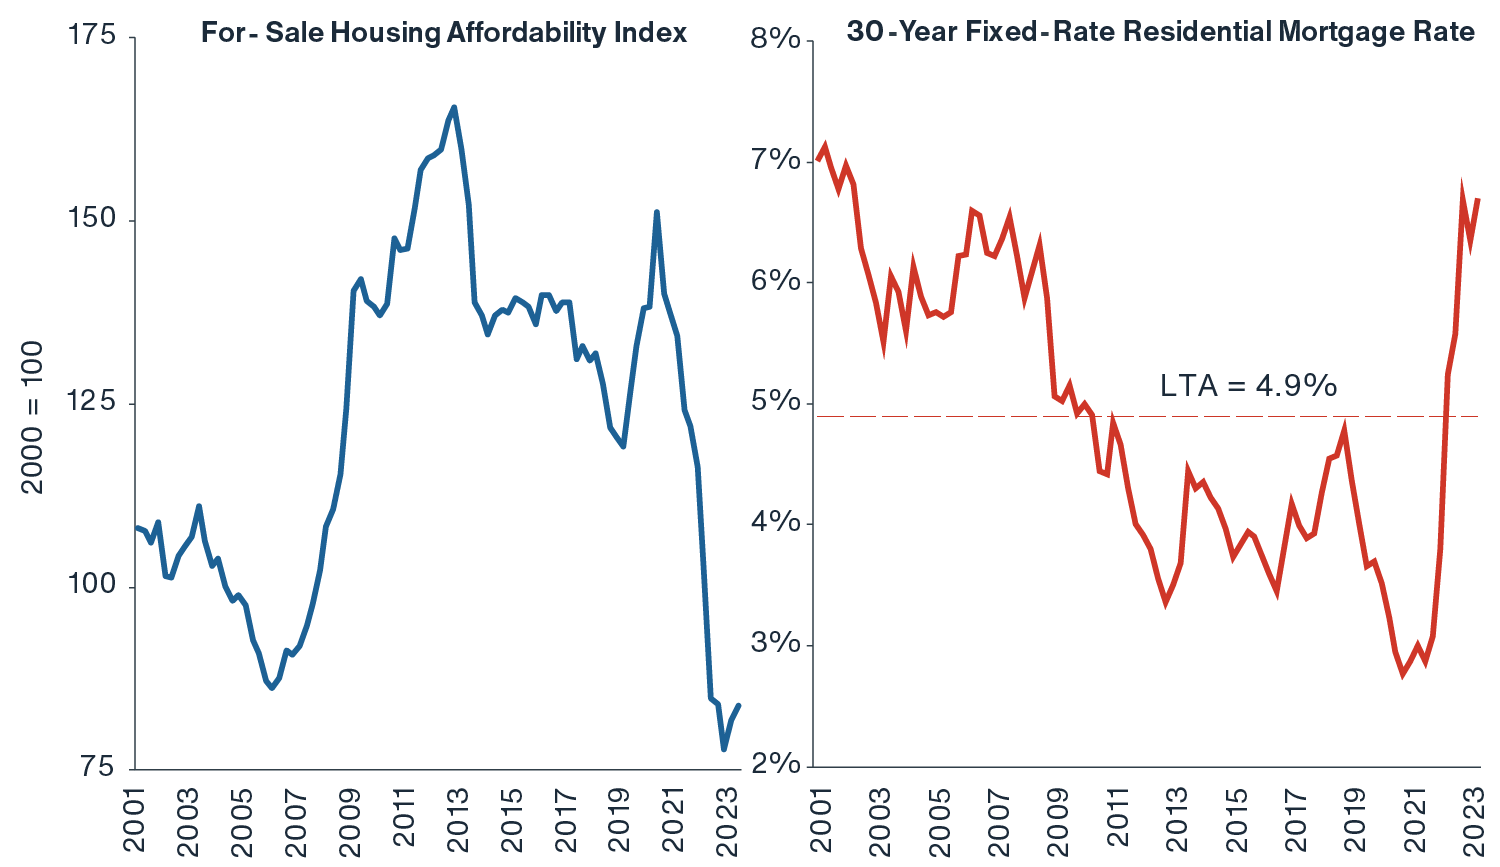 Chart showing the median U.S. home price is at a new high, while U.S. for-sale housing affordability reached an all-time low